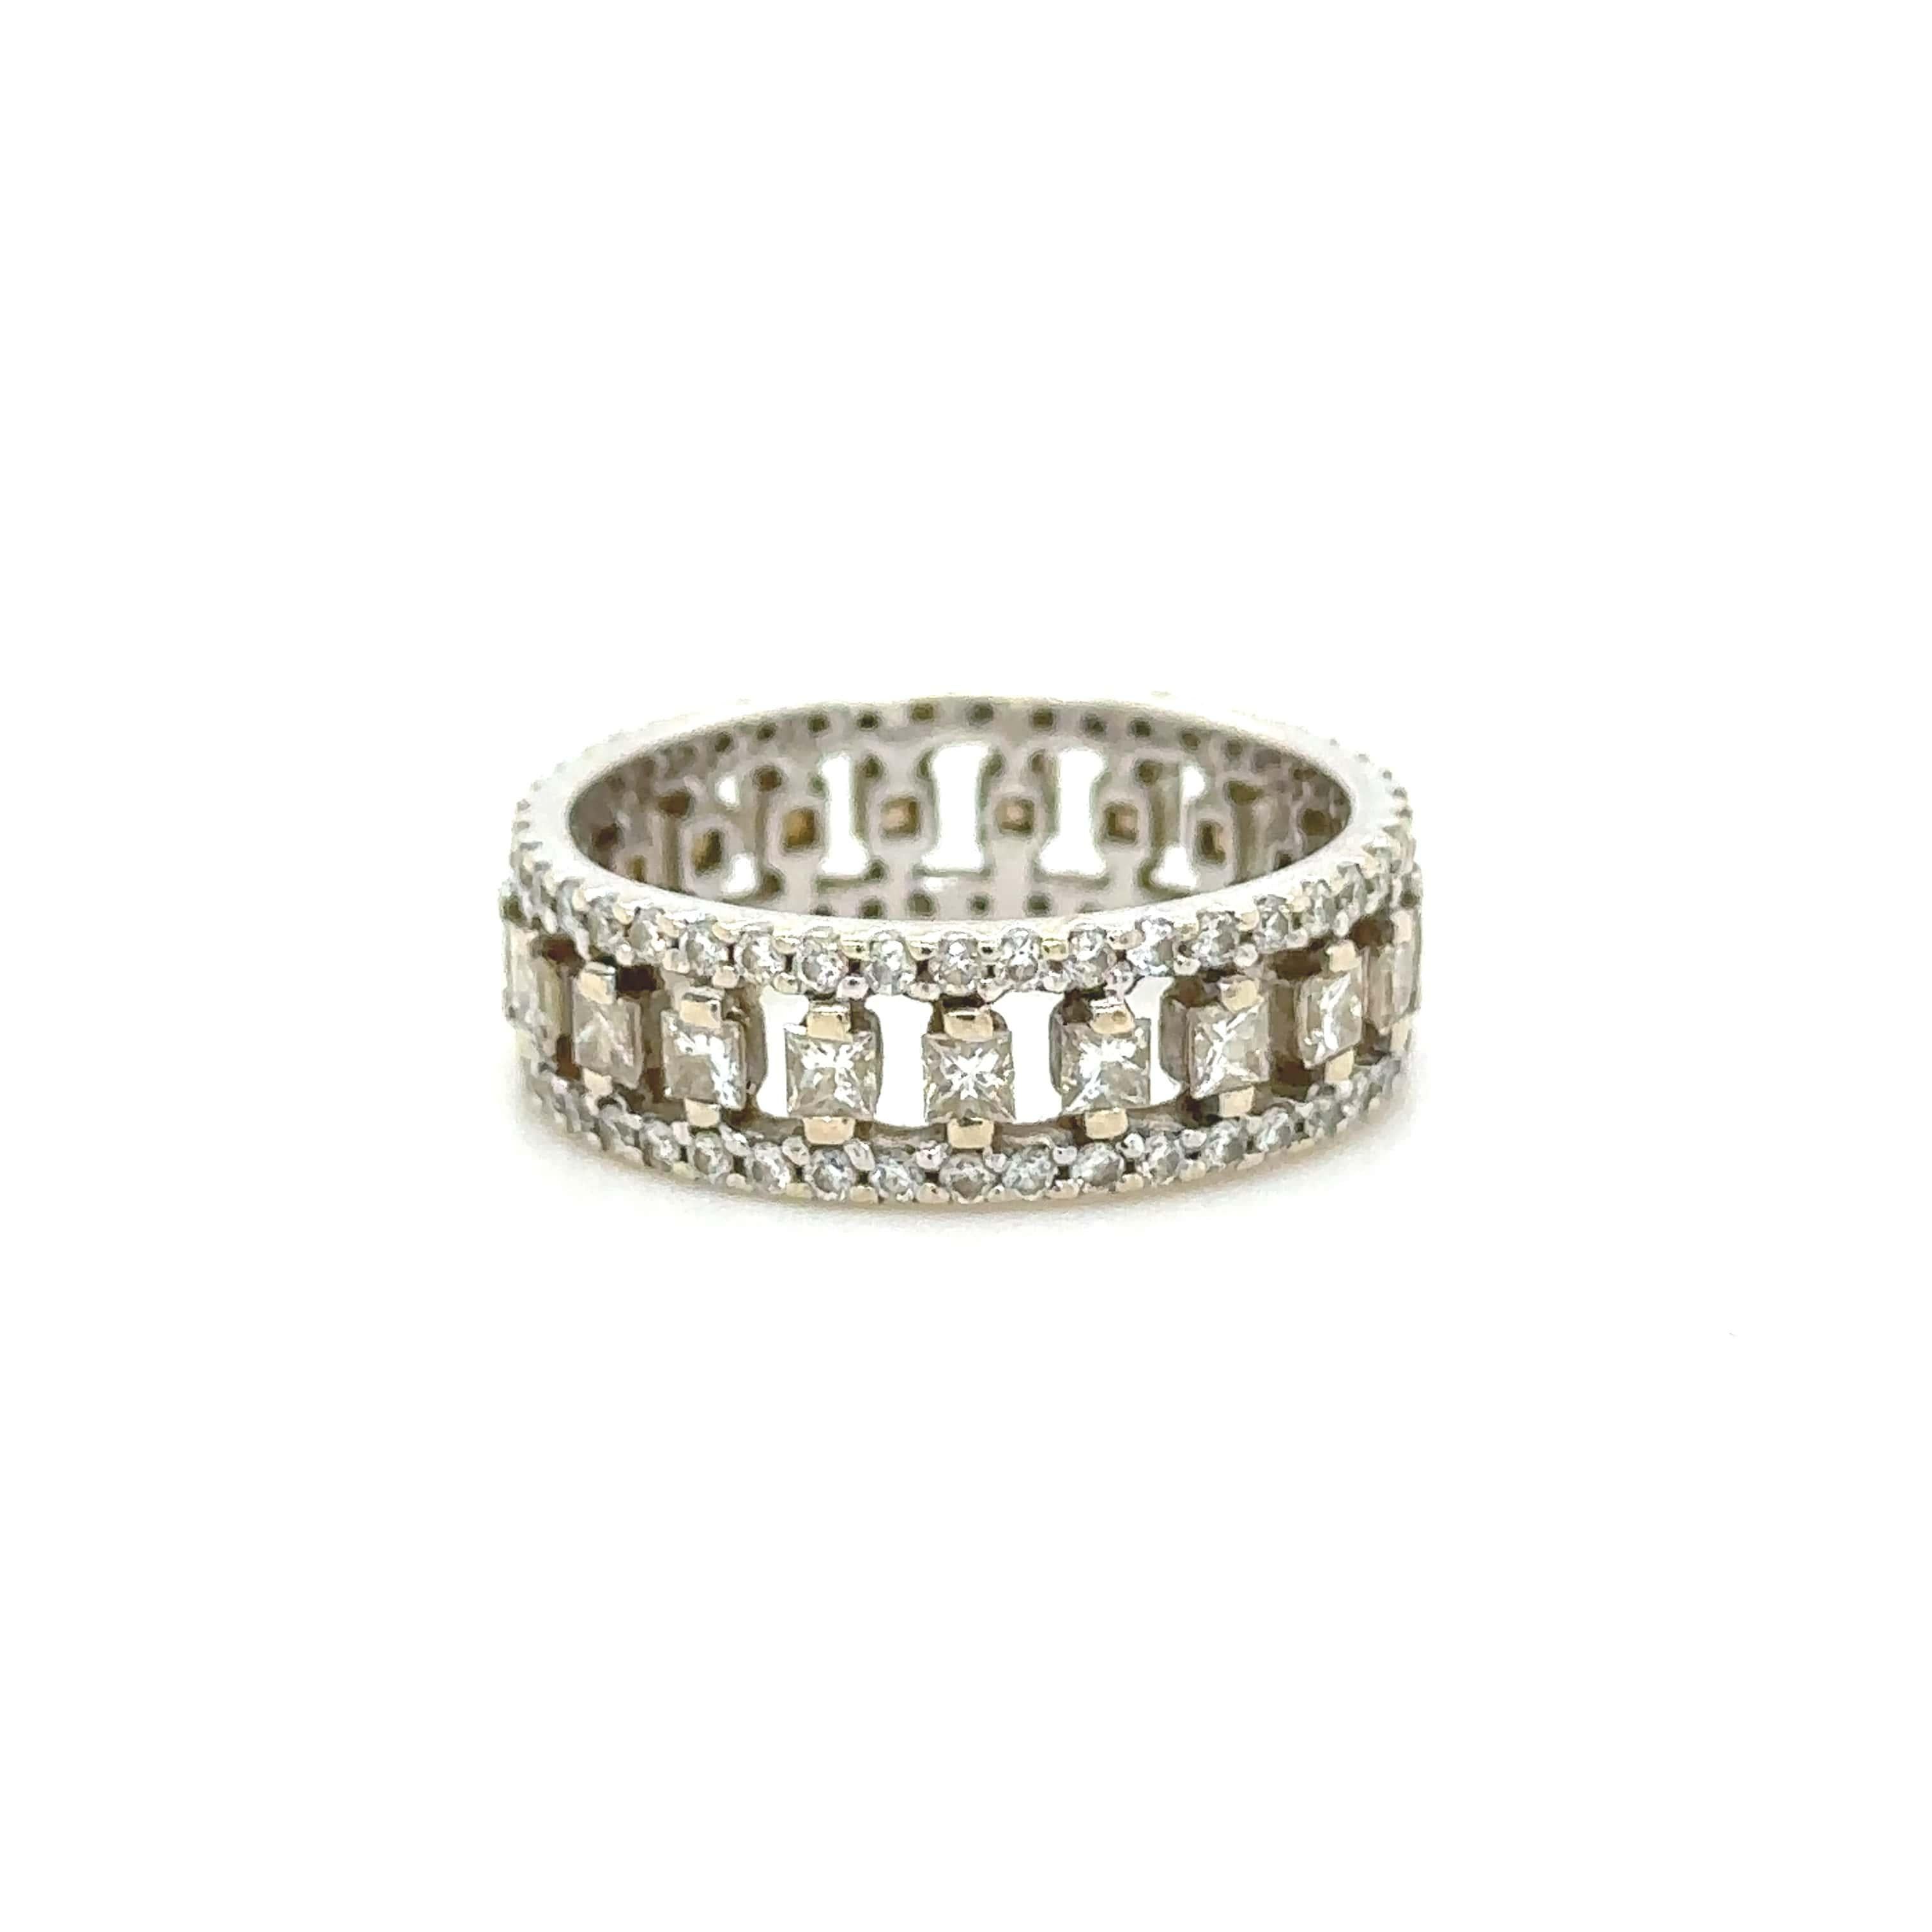 Unique features:

A ladies, diamond eternity Ring 

Diamond eternity ring. Made of 18 kt White Gold, and ring size of N 1/2, and weighing 4.1gm. Stamped: 750. 

Set with 21 princess, brilliant cut Diamonds, colour G and clarity VS-SI. with a total